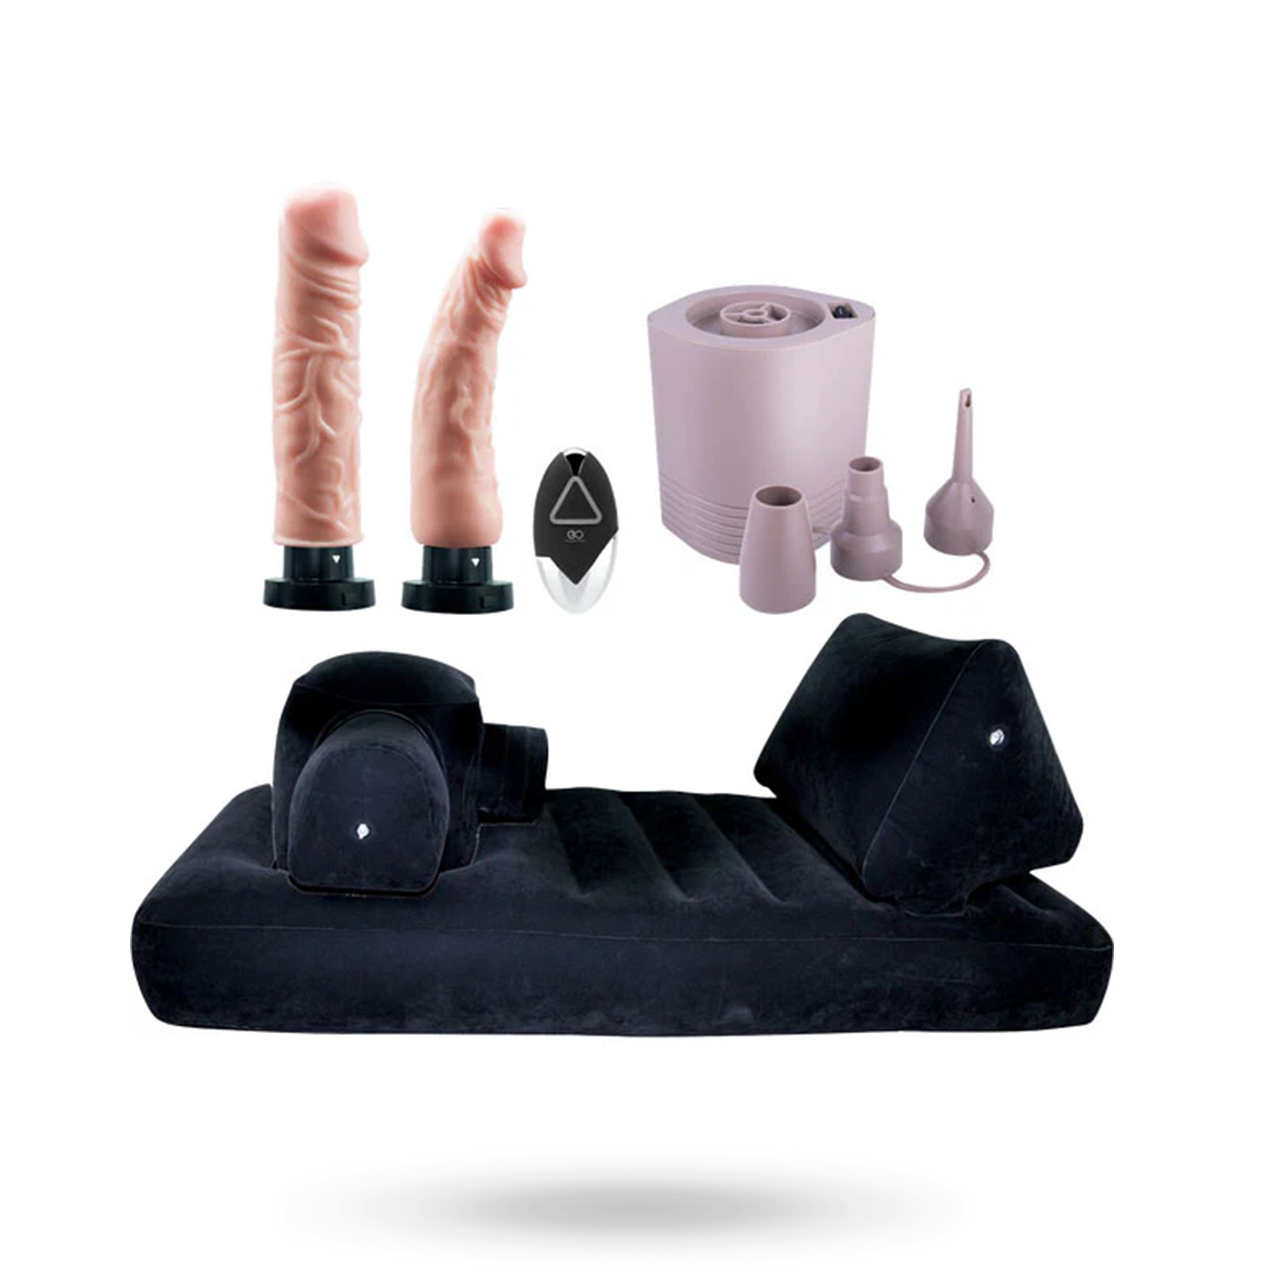 My Velveted Luxury Inflatable Bed & Thrusting Machine